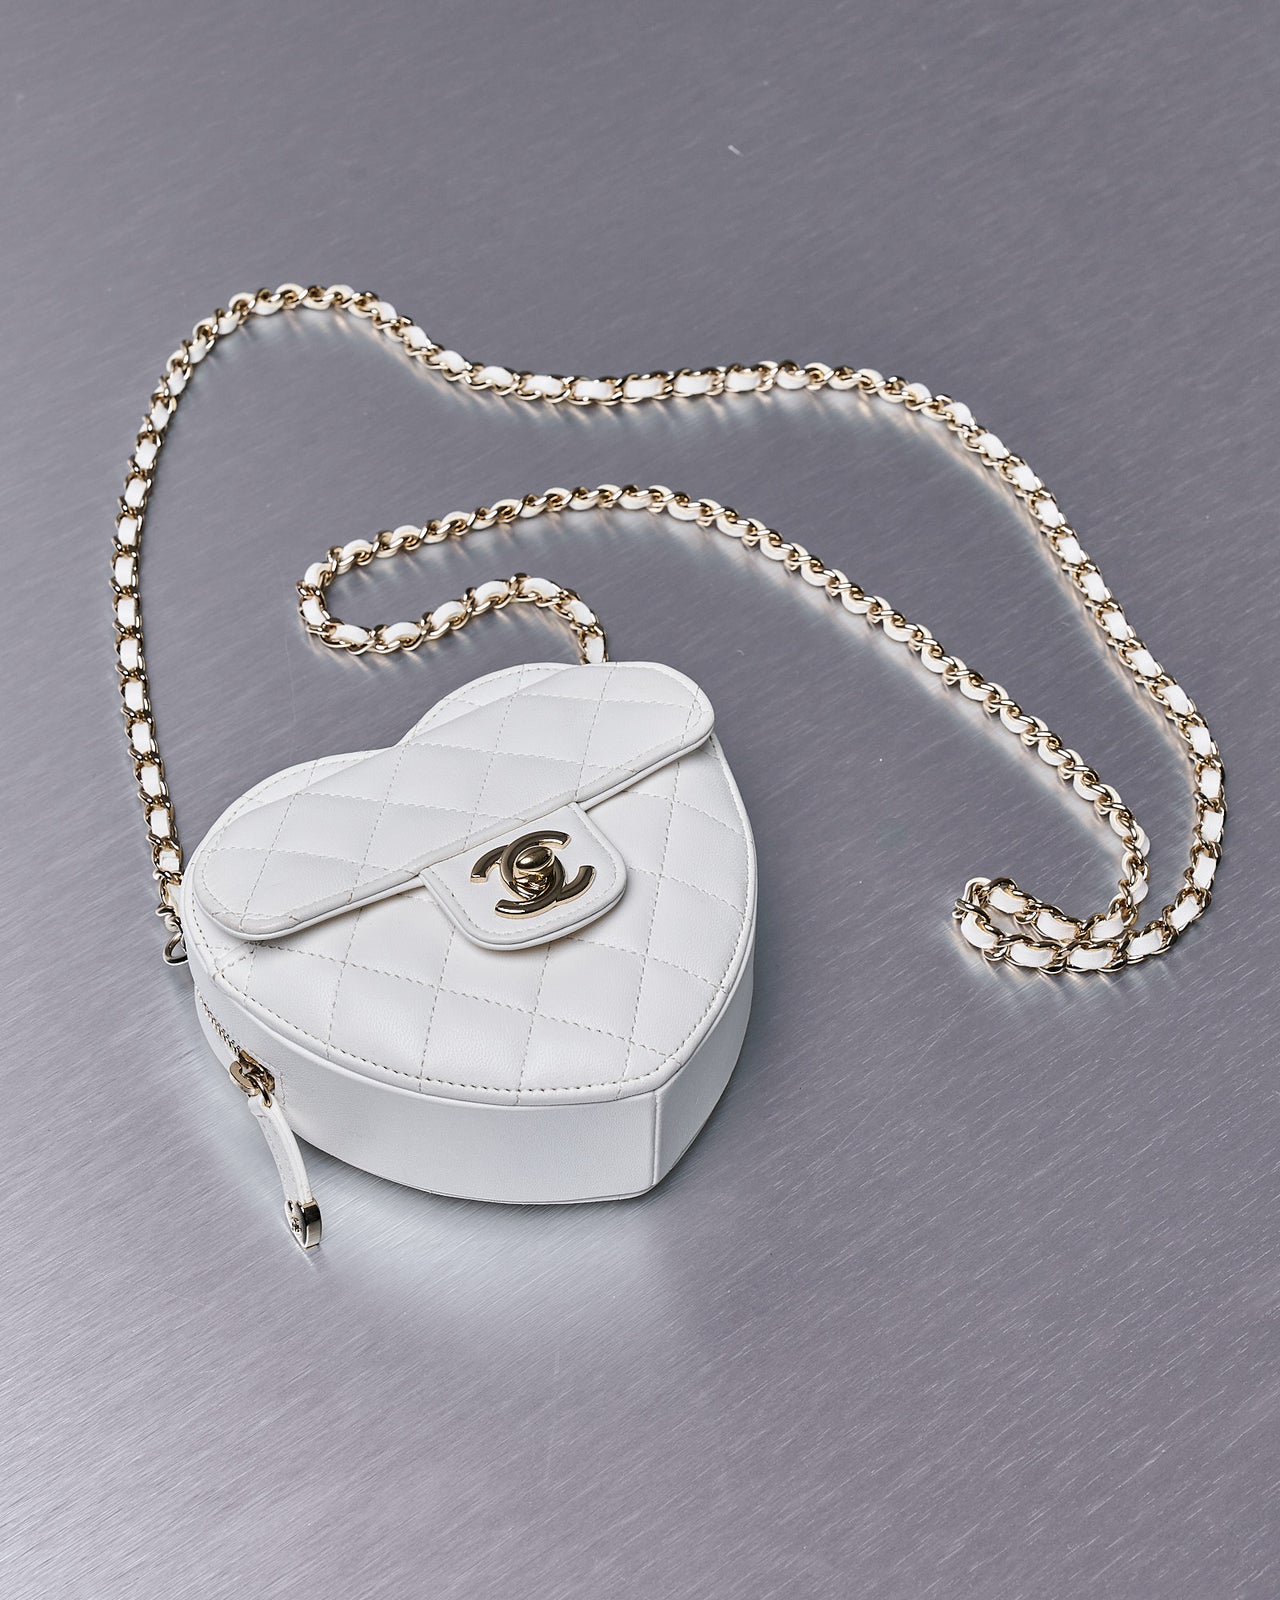 Chanel SS 2022 Small heart clutch with chain